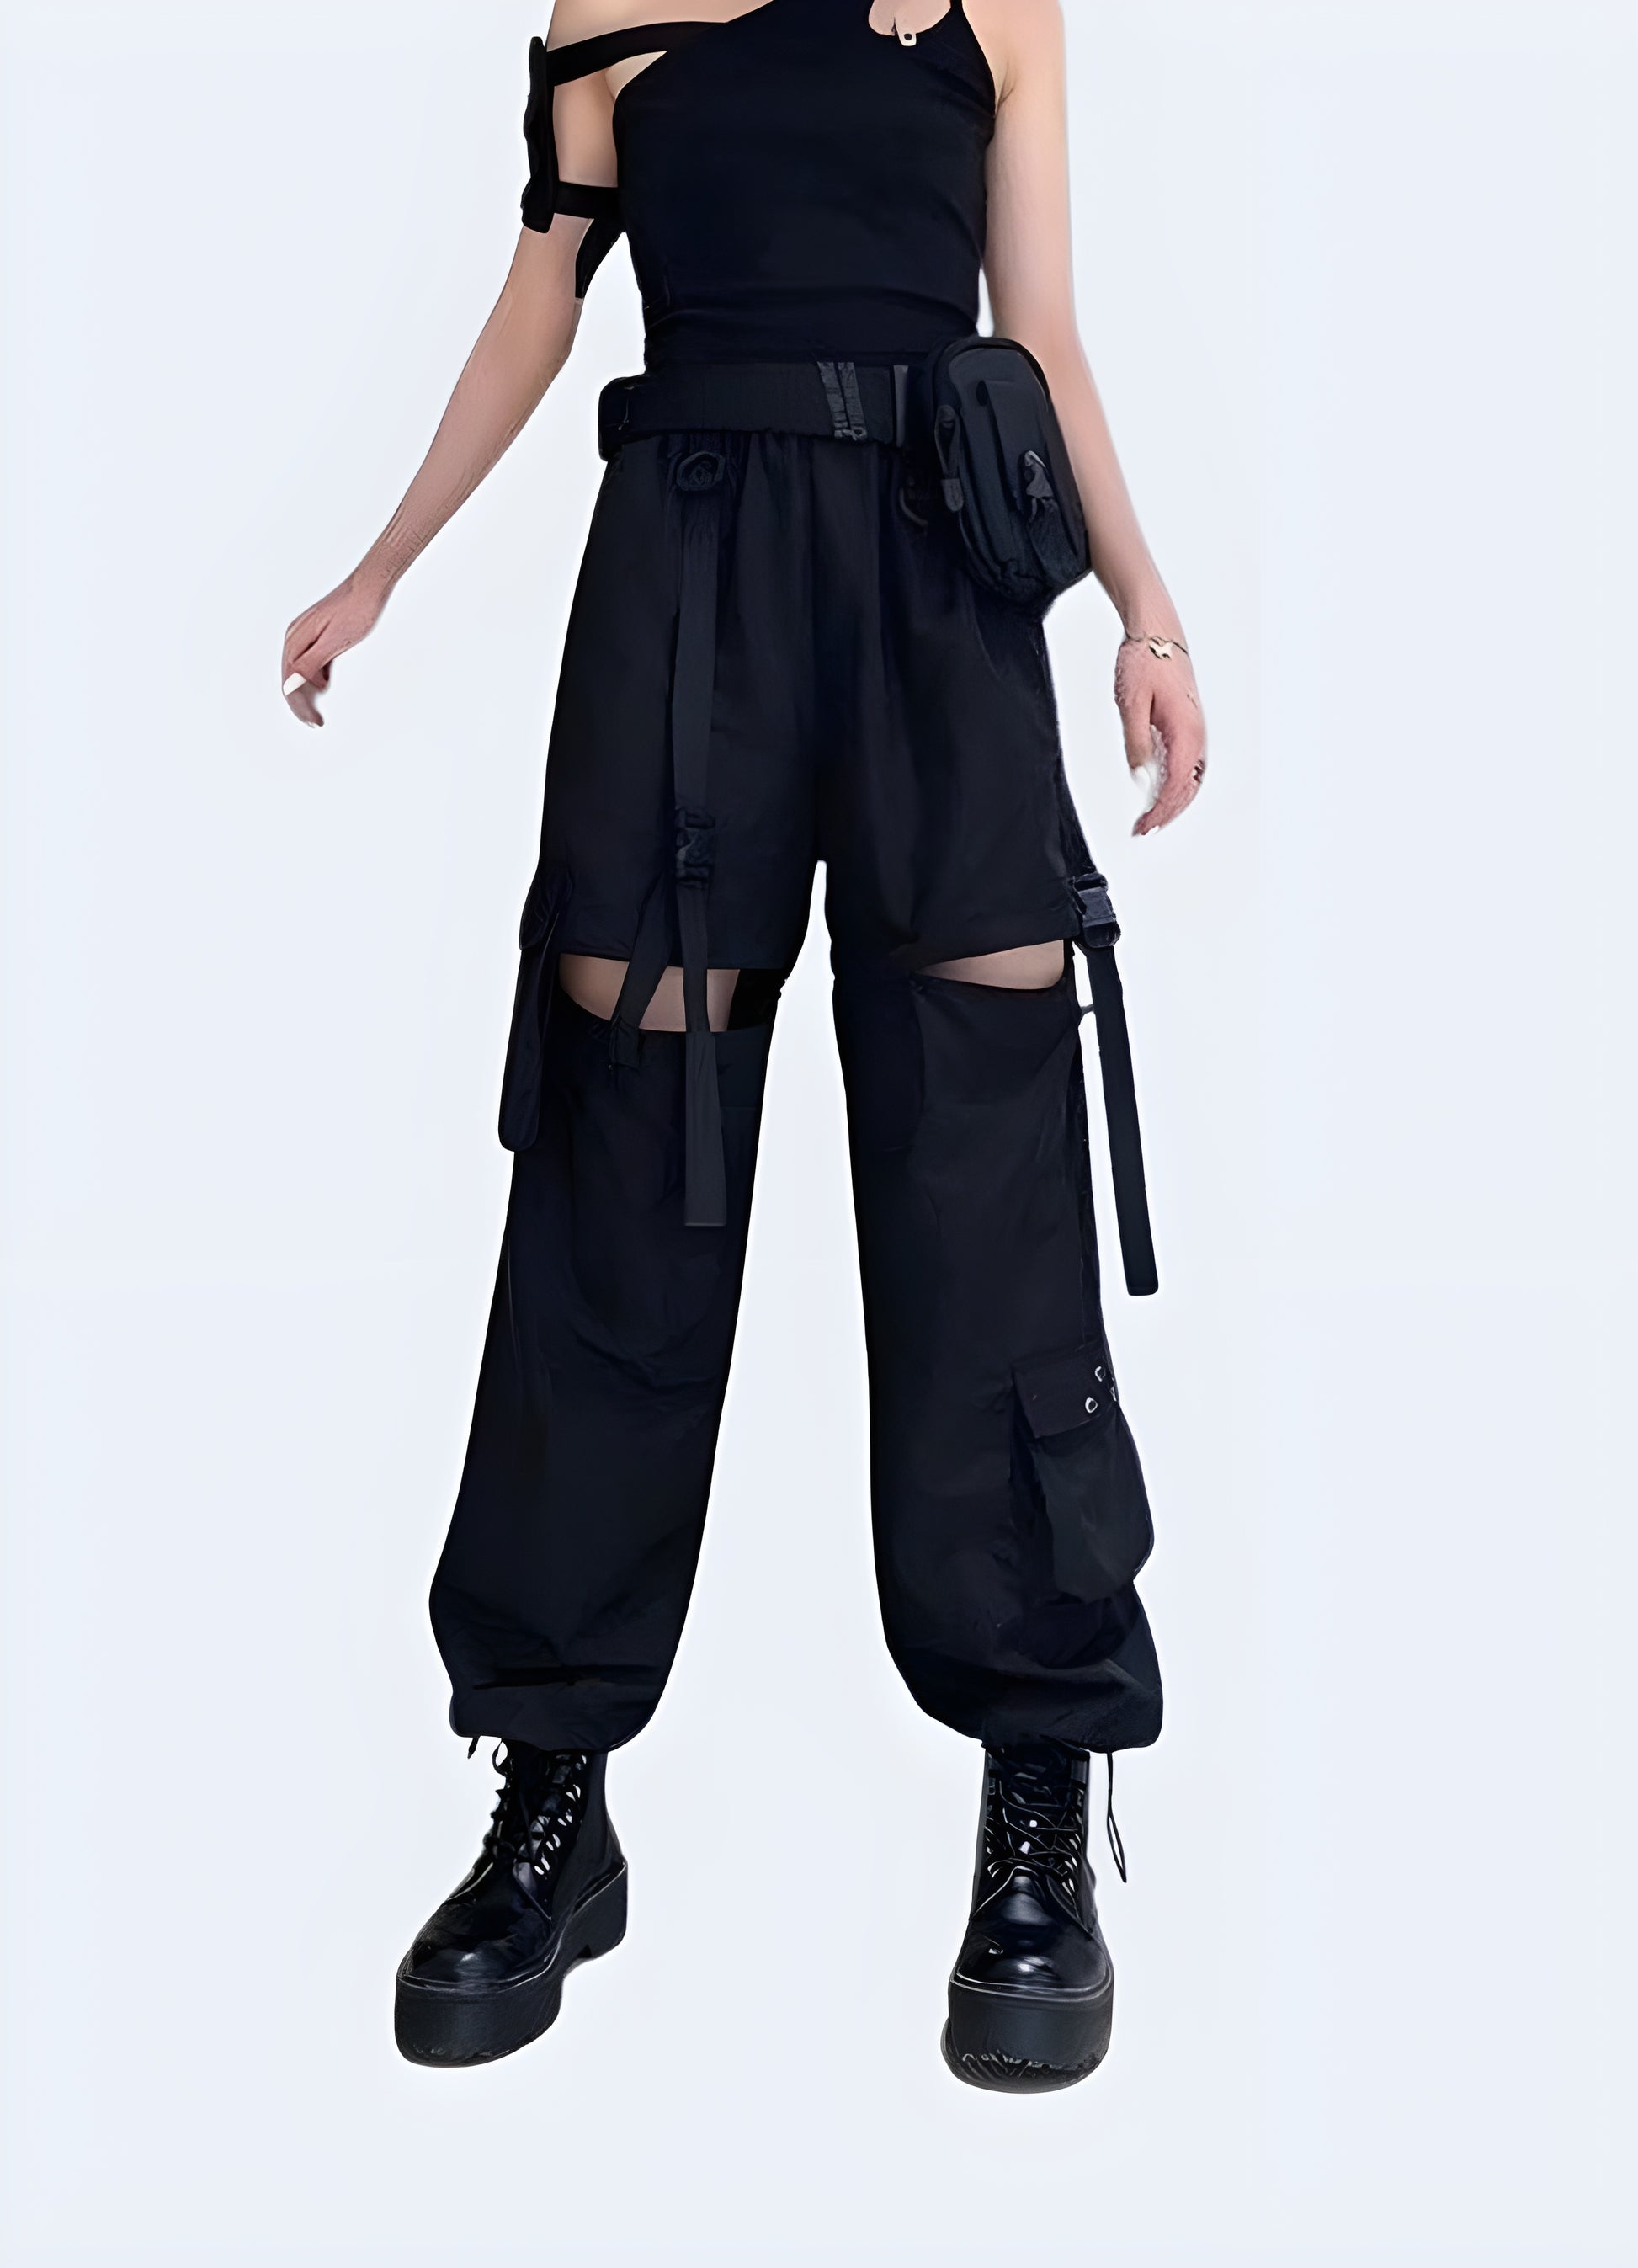 These black cargo pants are a wardrobe staple for women.